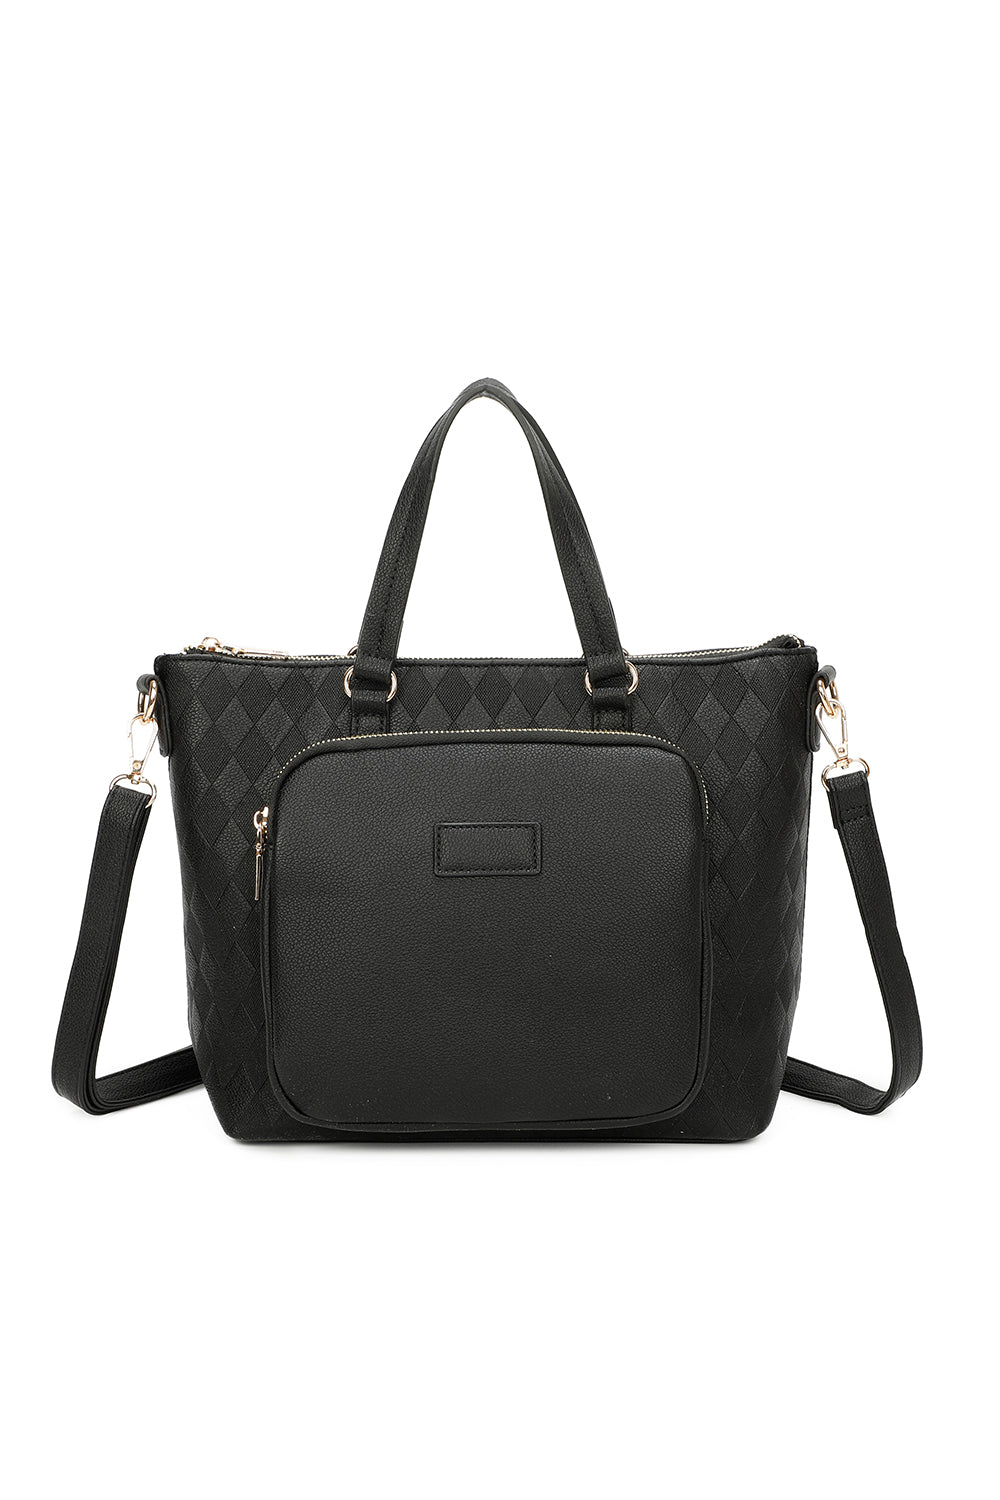 Rent, Buy and Sell Designer Handbags & Accessories - Bag Borrow or Steal